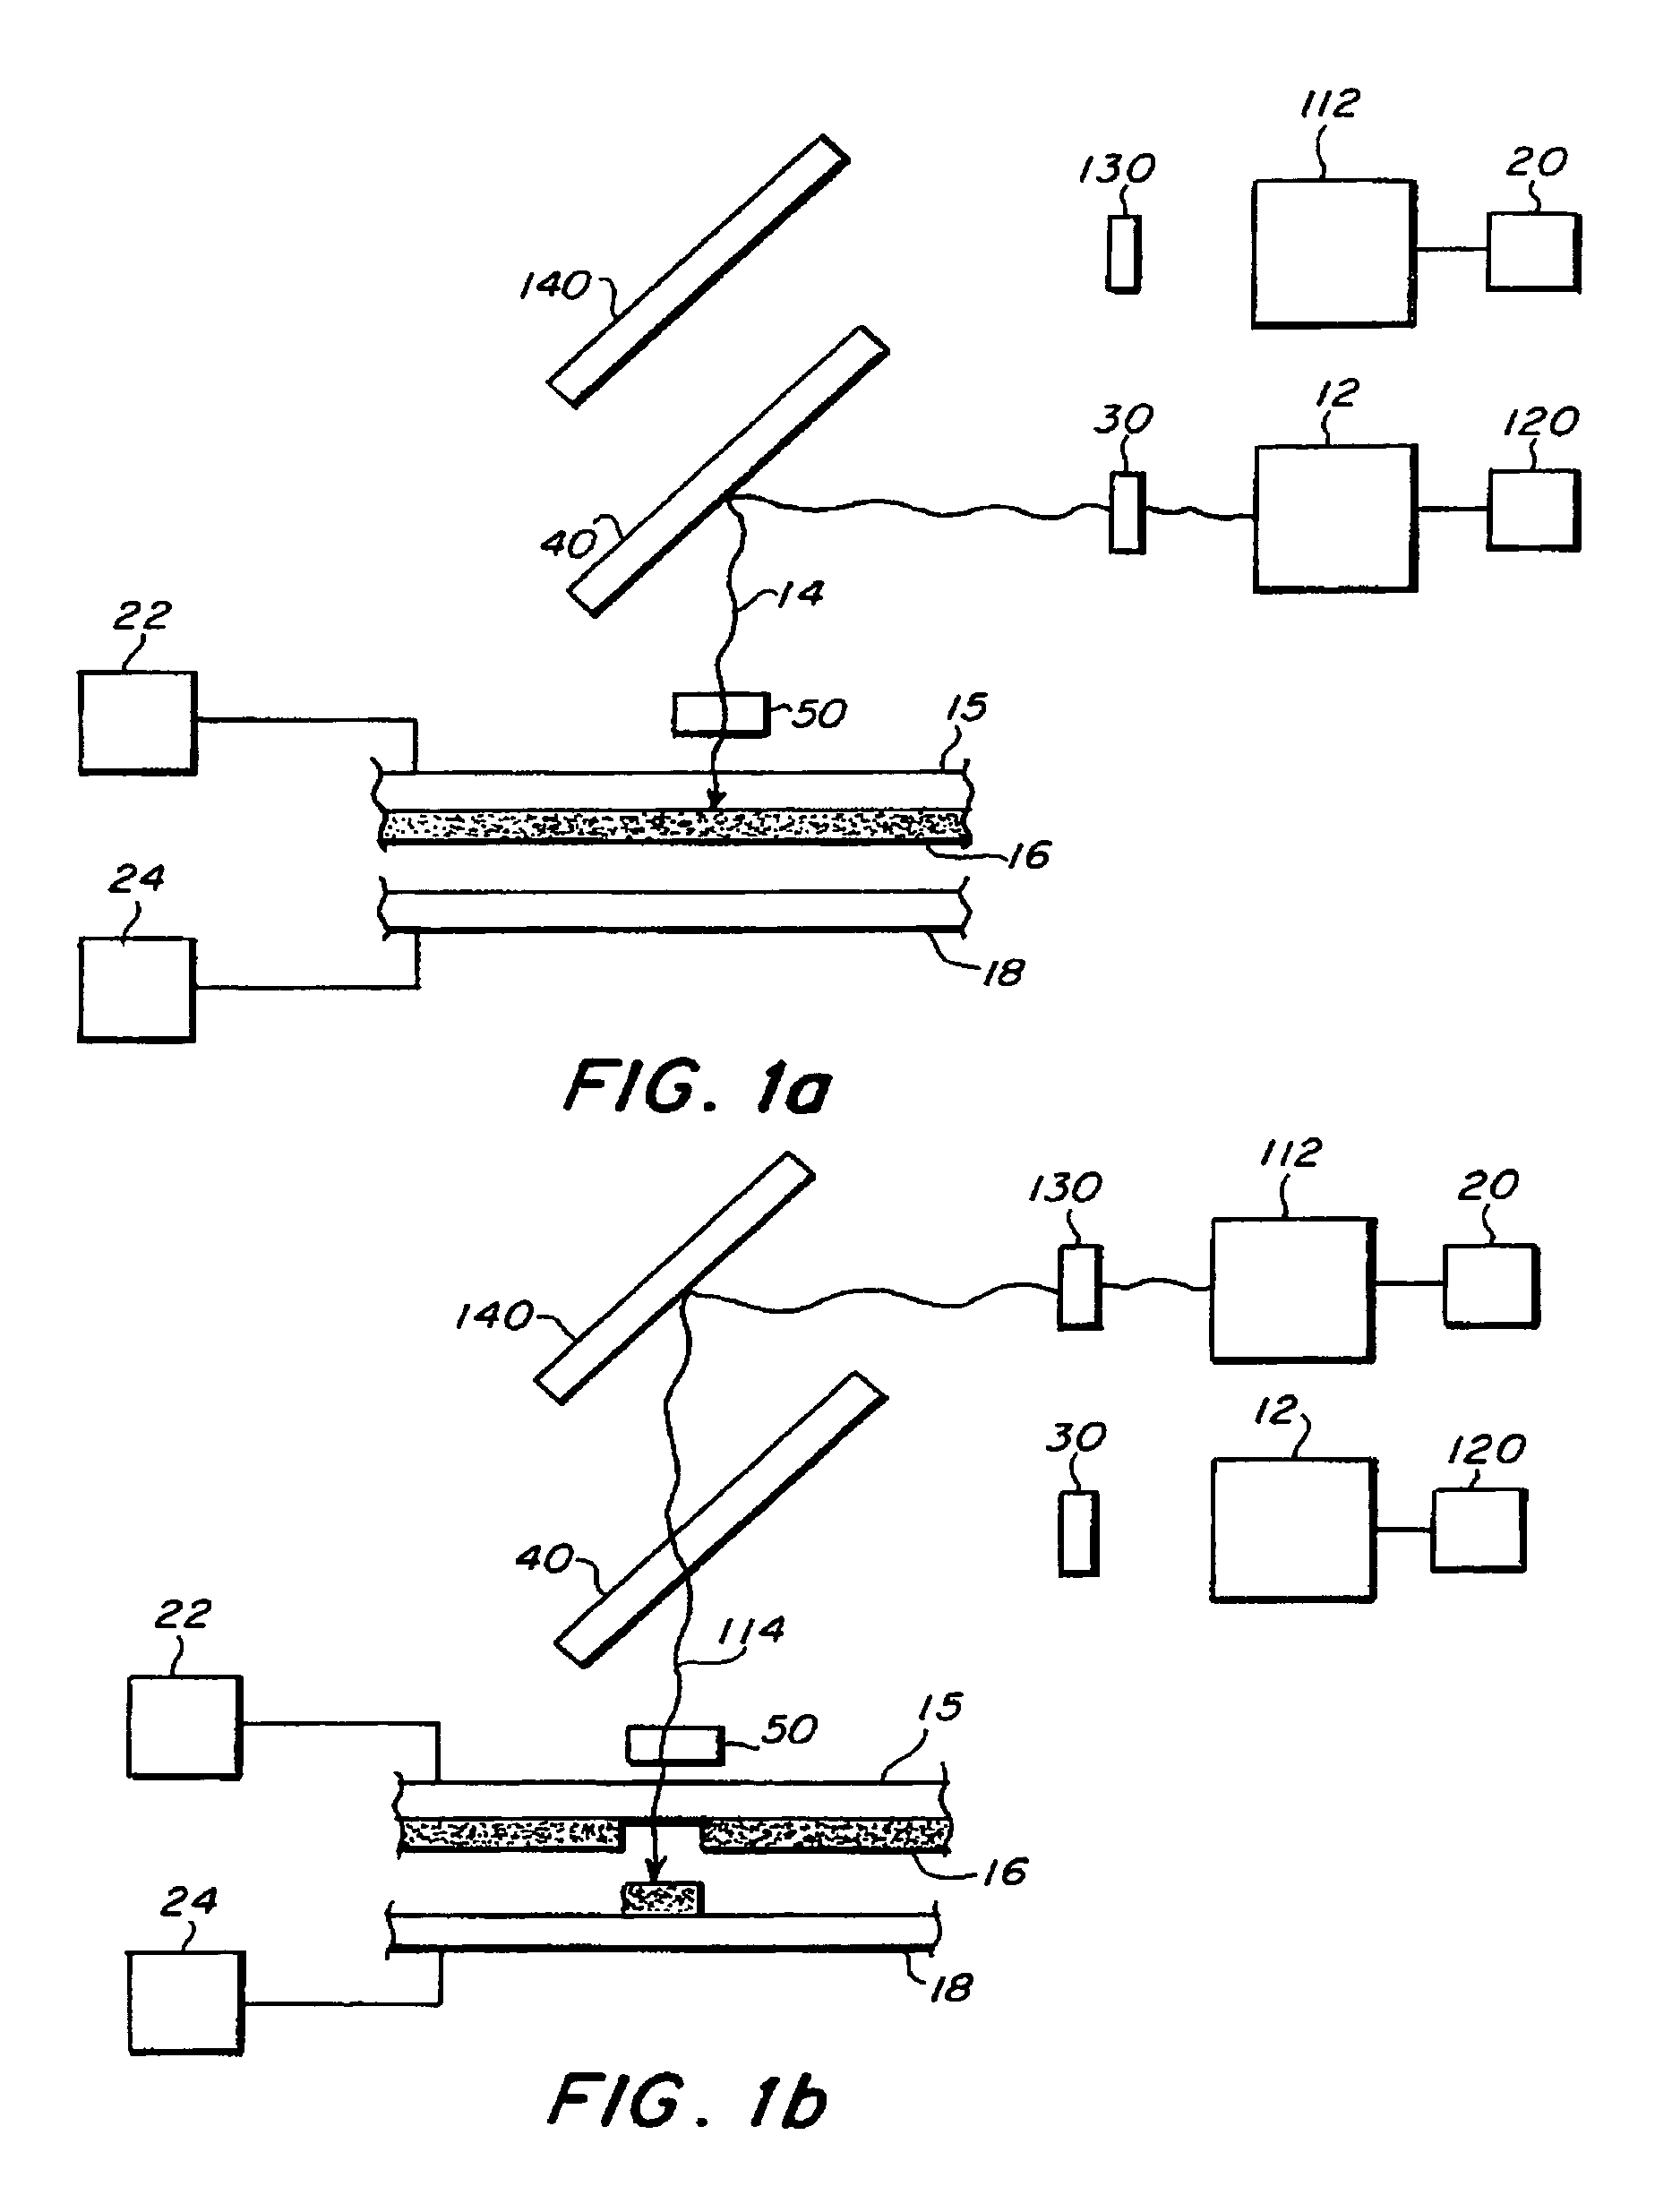 Direct-write laser transfer and processing